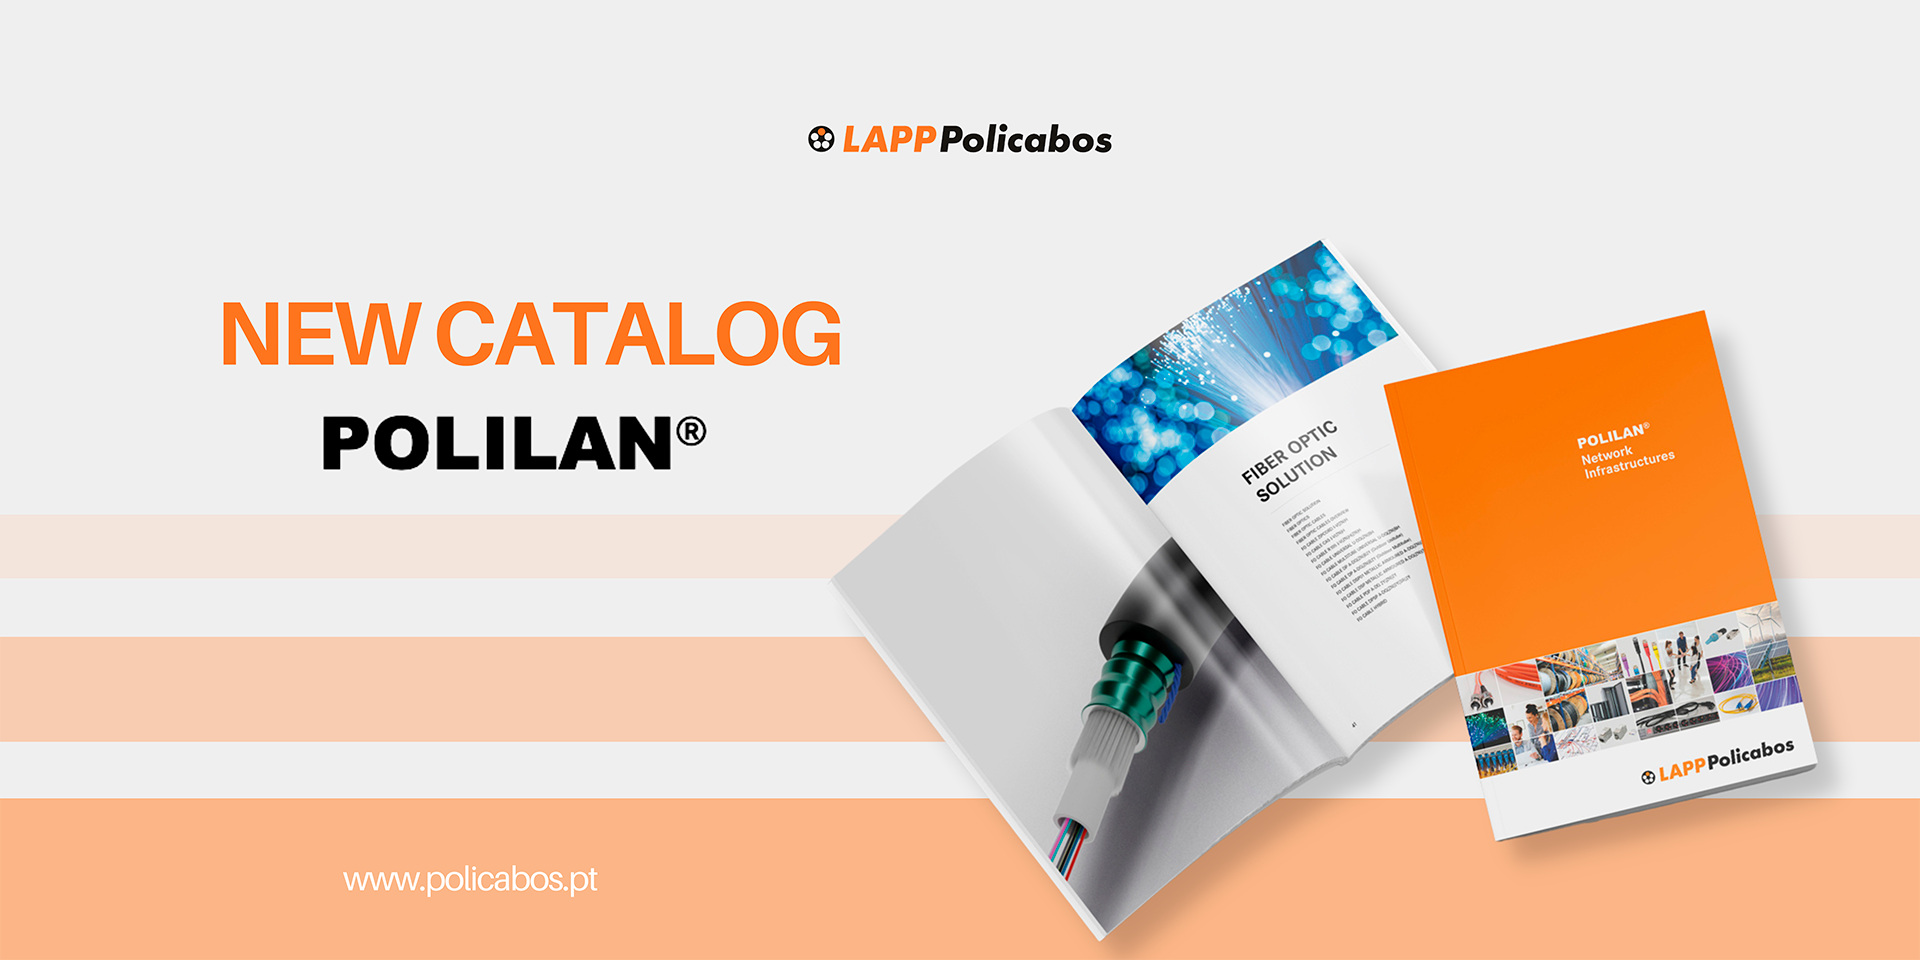 Innovative Solutions for Fiber Optic Applications: Explore the New POLILAN Catalog of Network Infrastructures